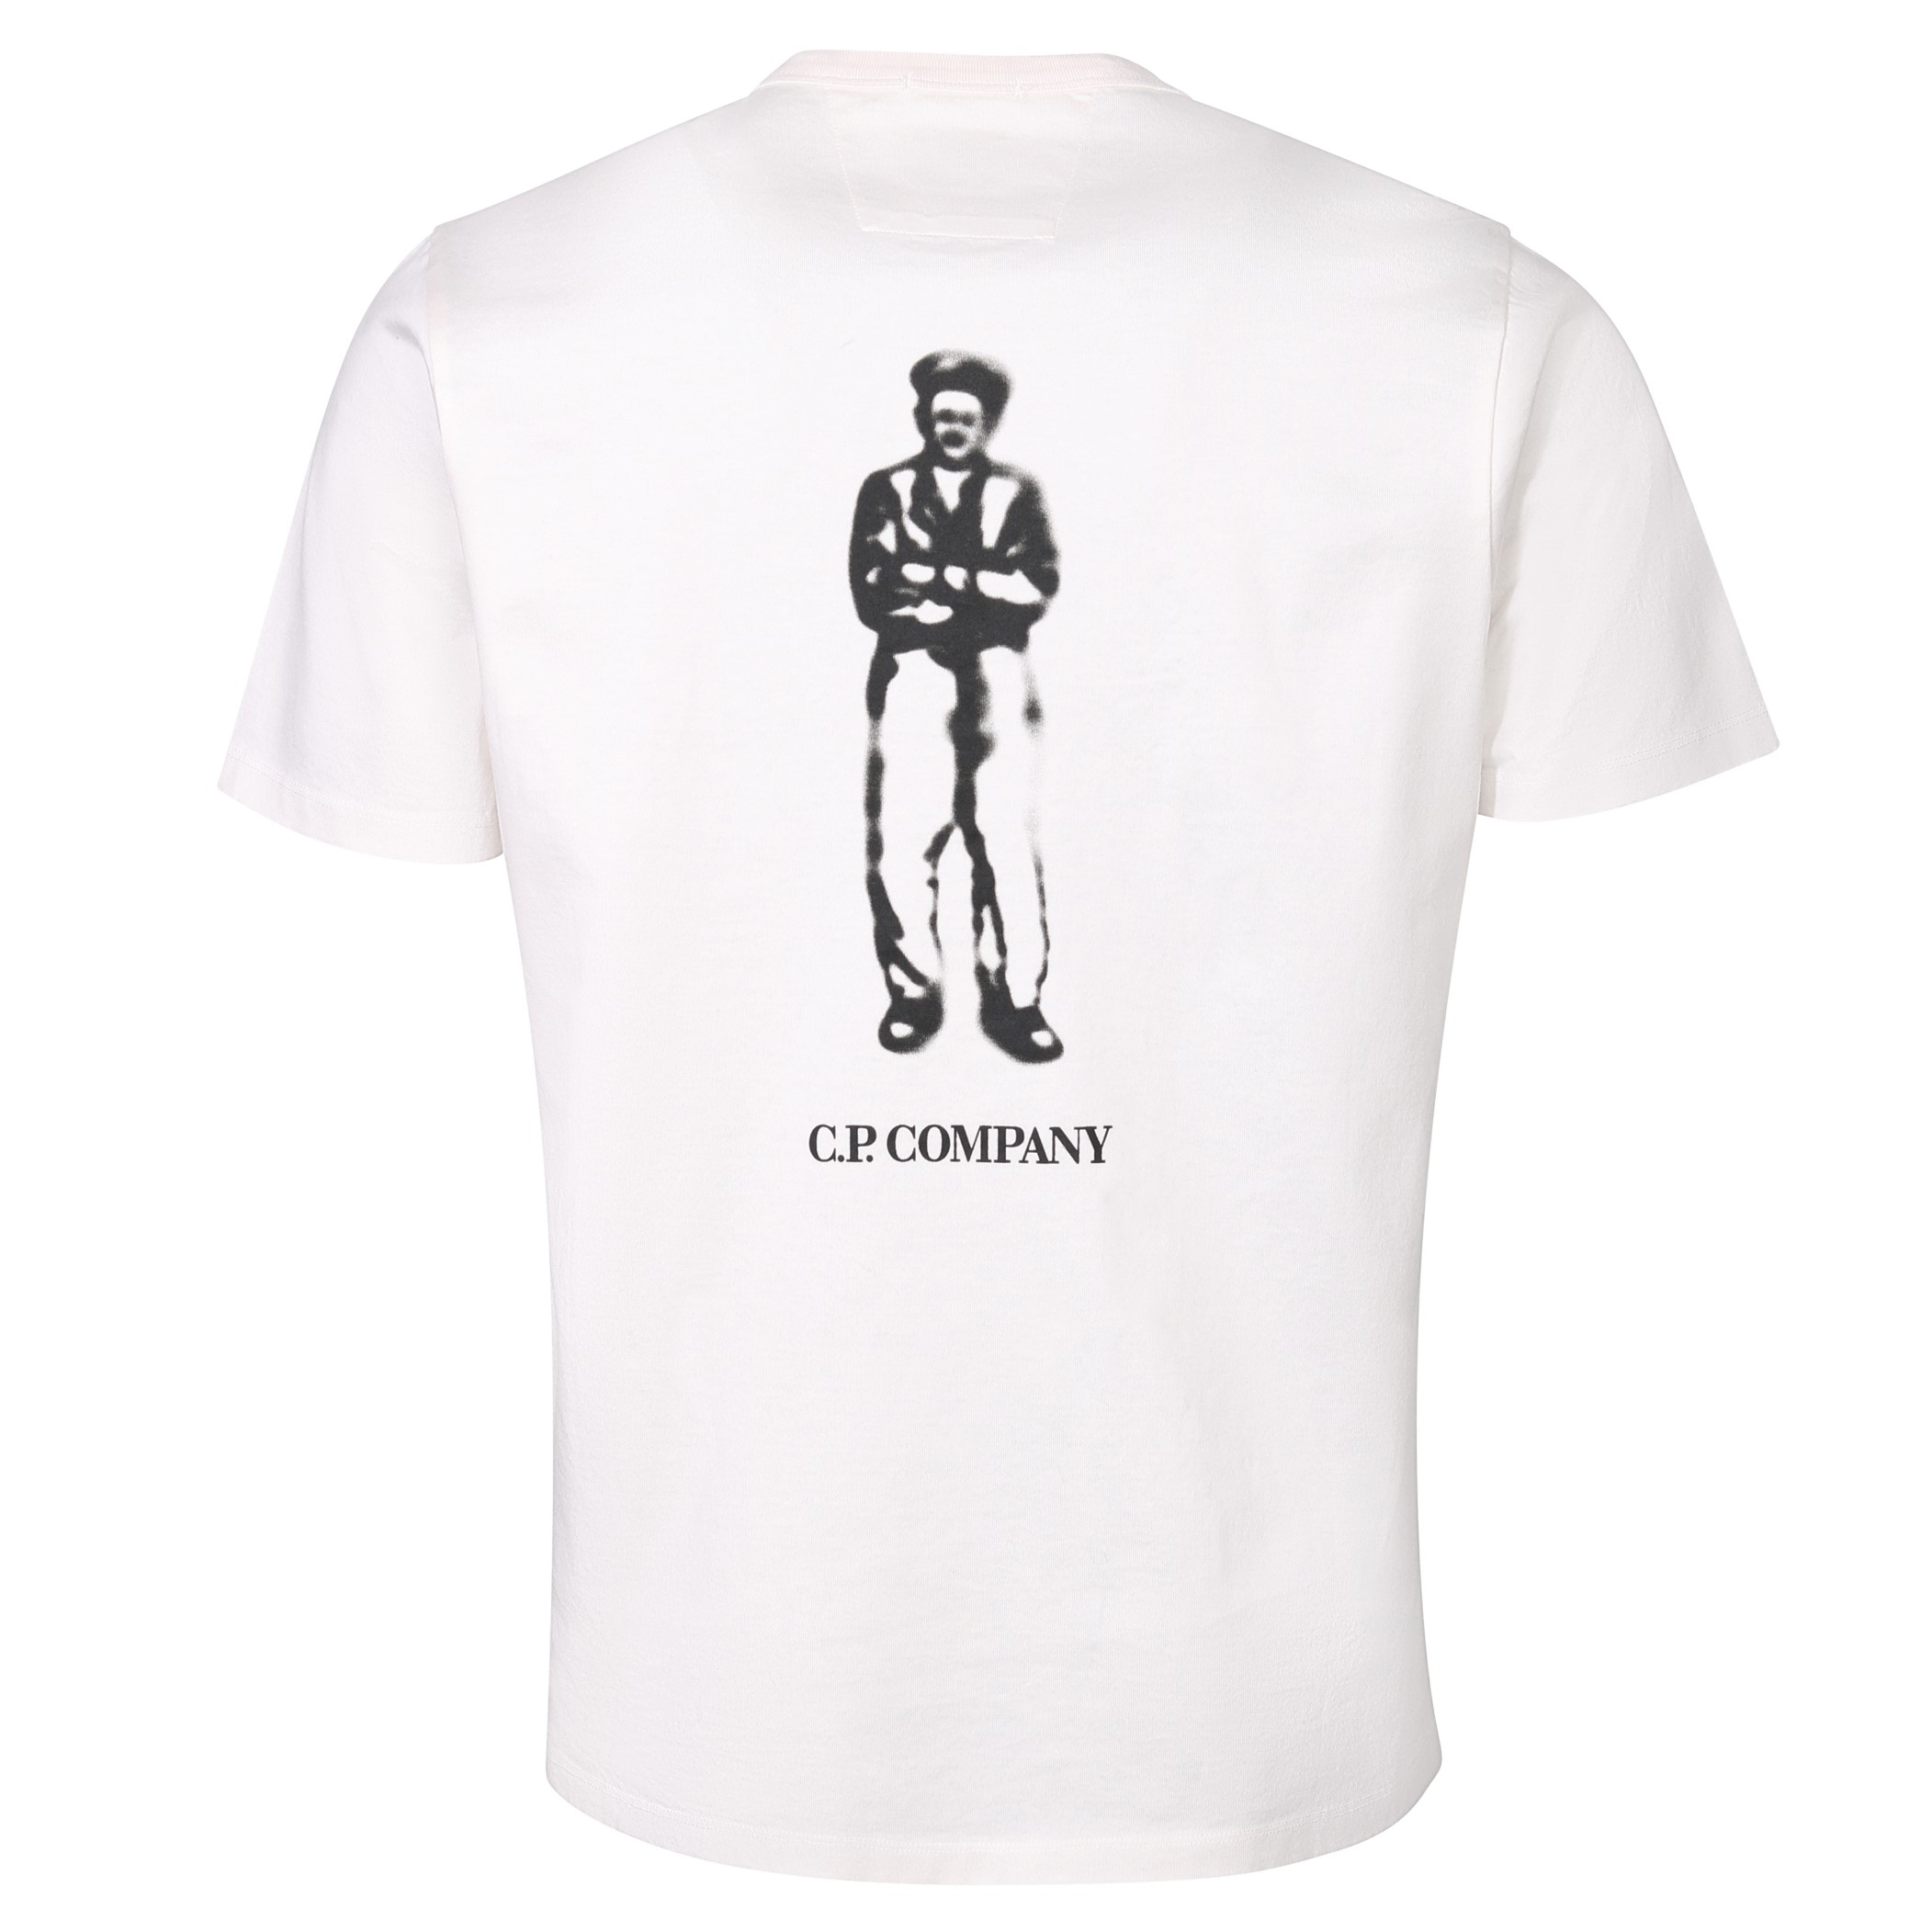 C.P. COMPANY T-Shirt in White S